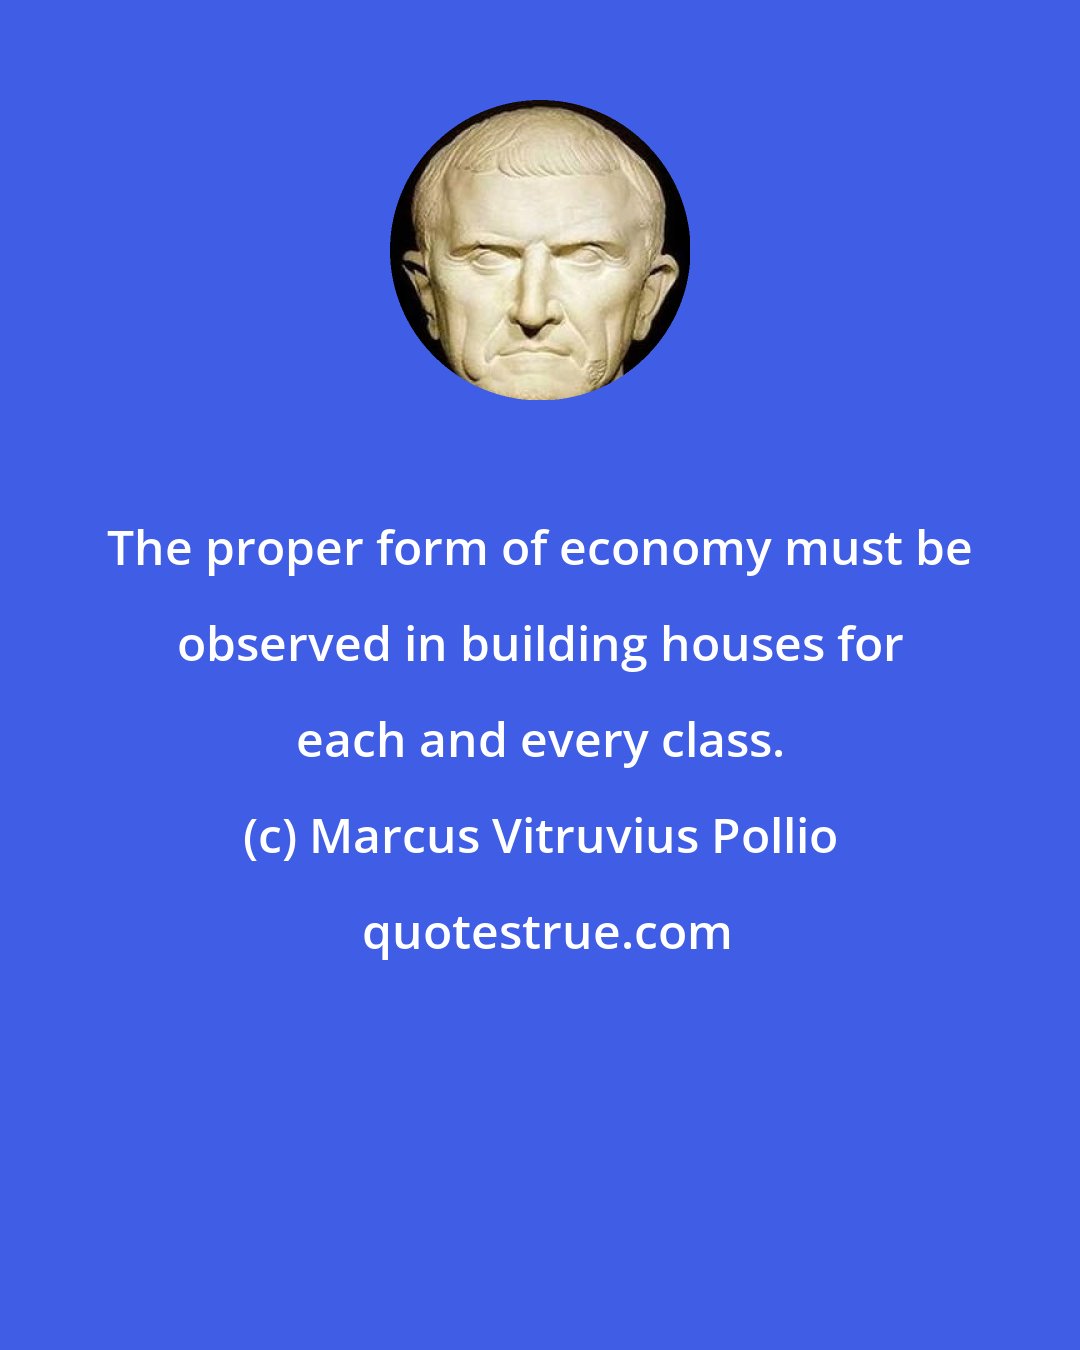 Marcus Vitruvius Pollio: The proper form of economy must be observed in building houses for each and every class.